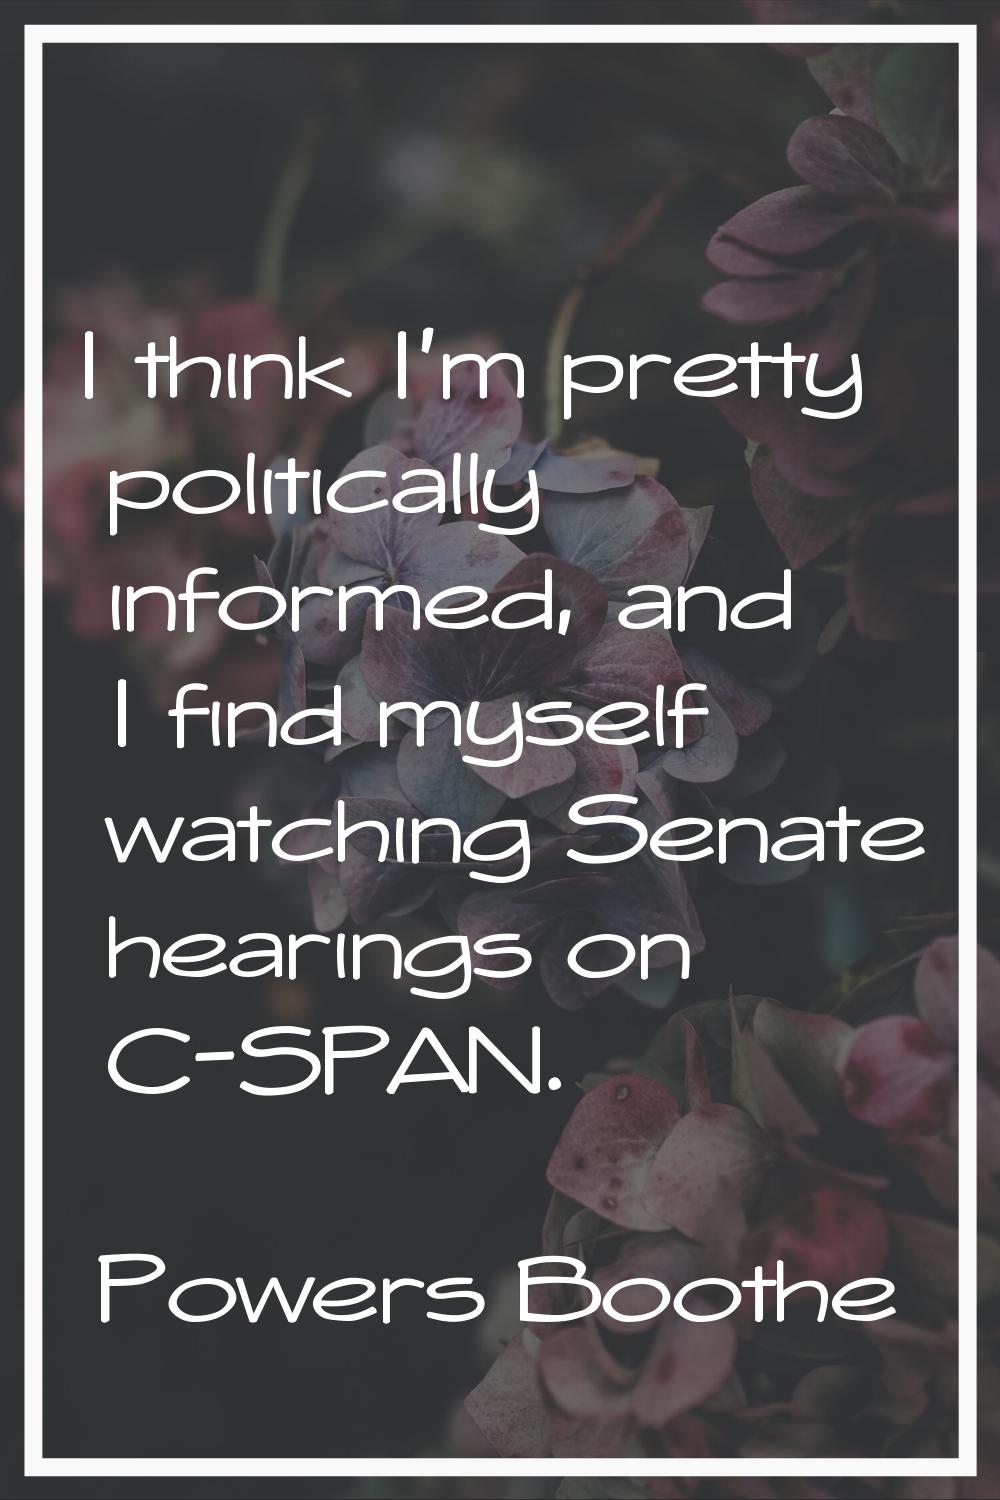 I think I'm pretty politically informed, and I find myself watching Senate hearings on C-SPAN.